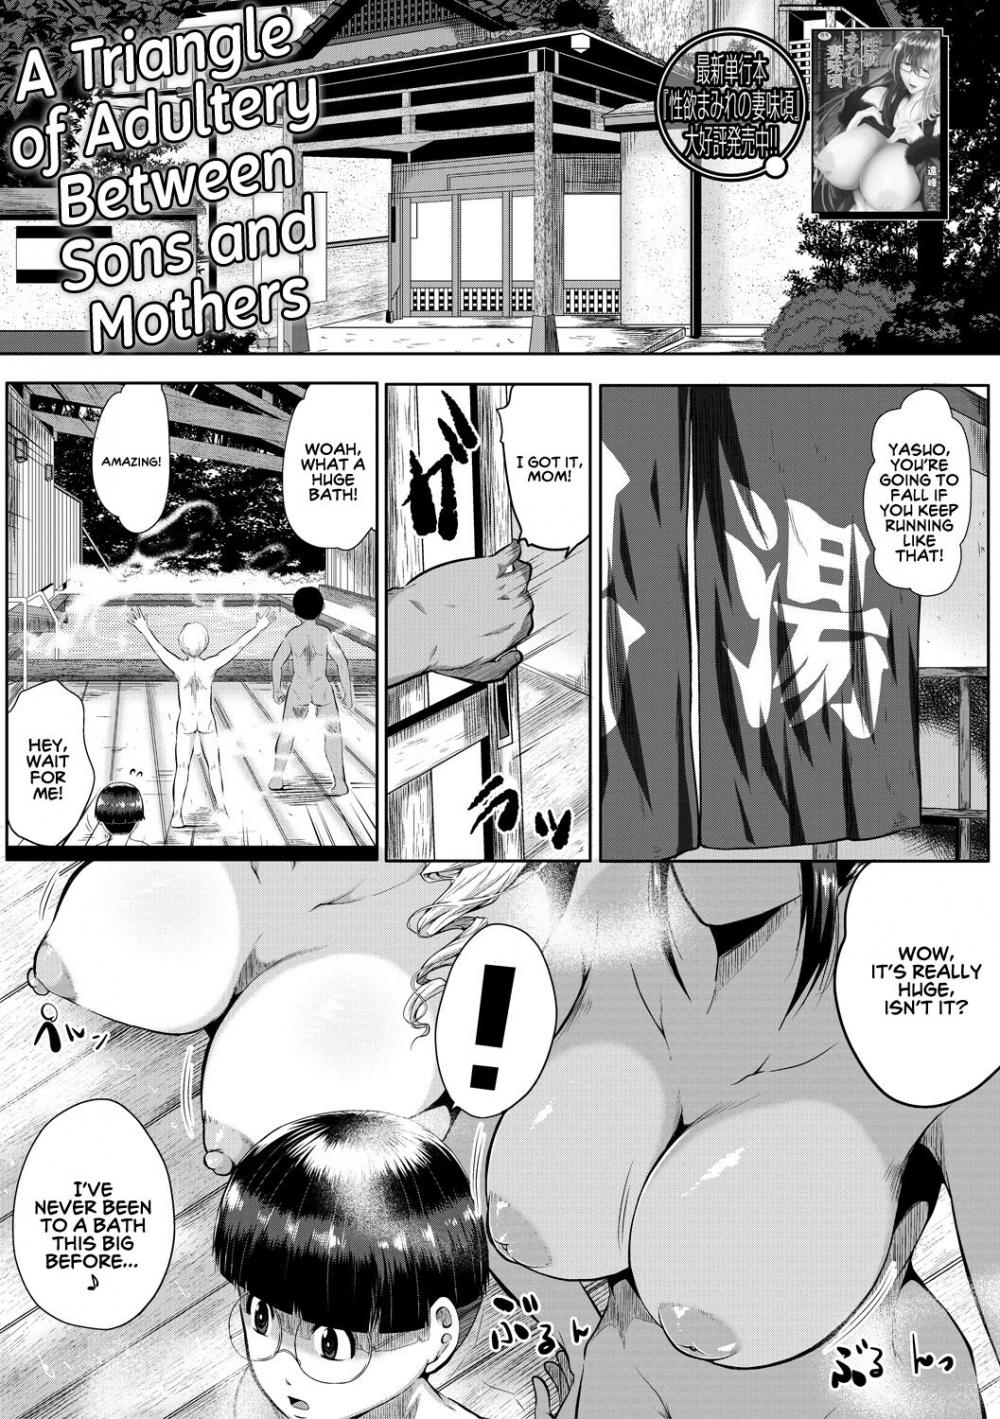 Hentai Manga Comic-A Triangle of Adultery Between Sons and Mothers-Read-1